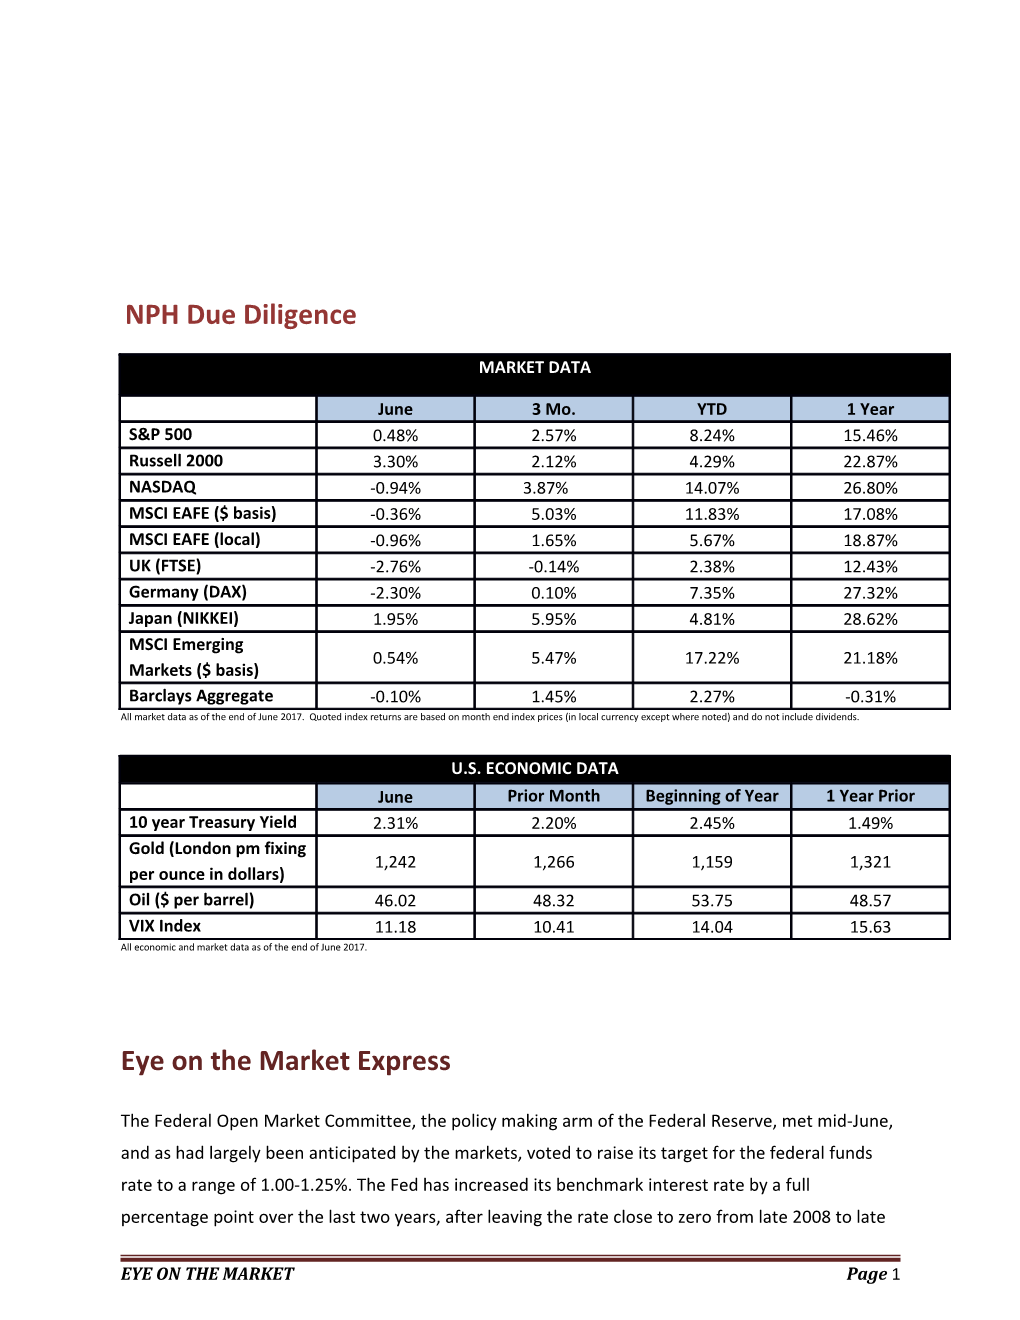 Eye on the Market Client Express - August 2013